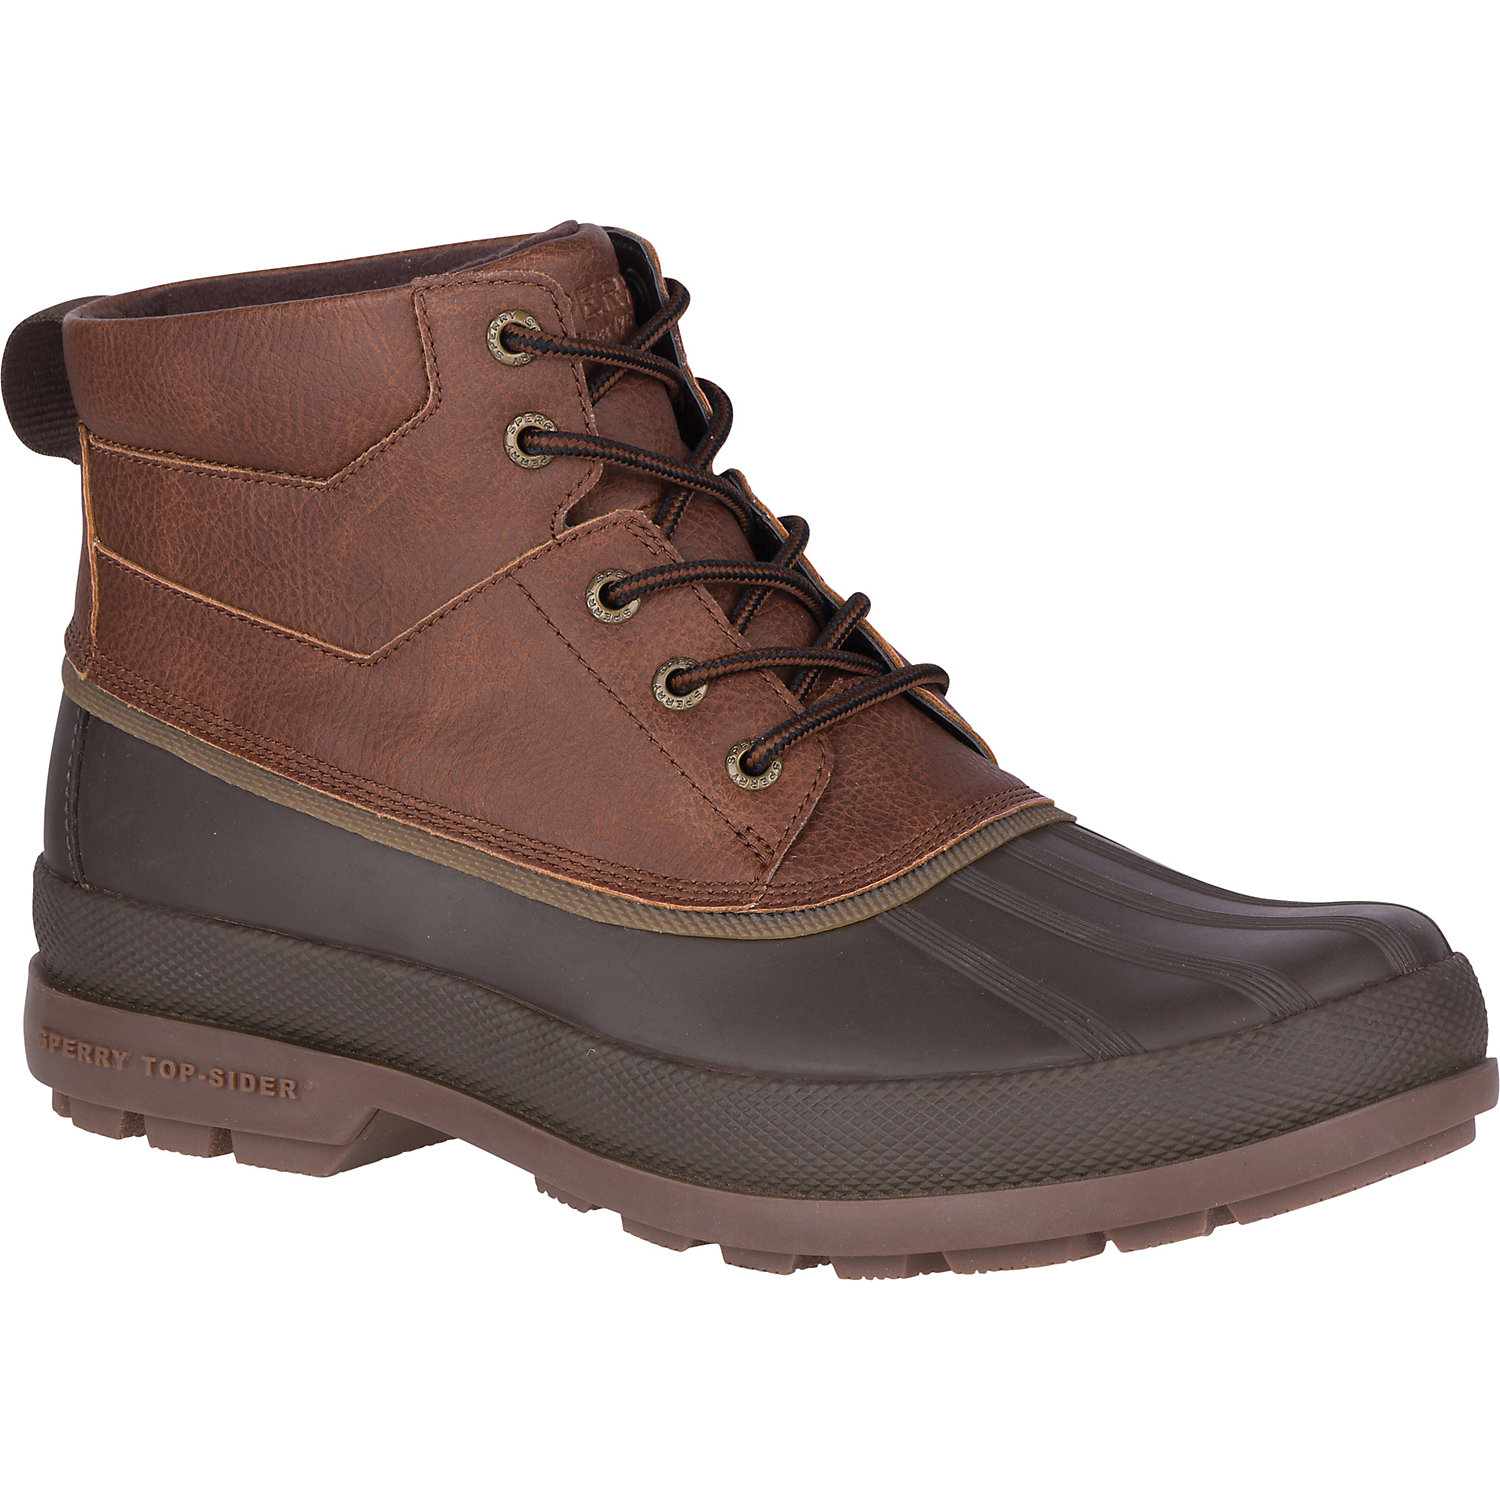 Sperry Mens Cold Bay Chukka Boot